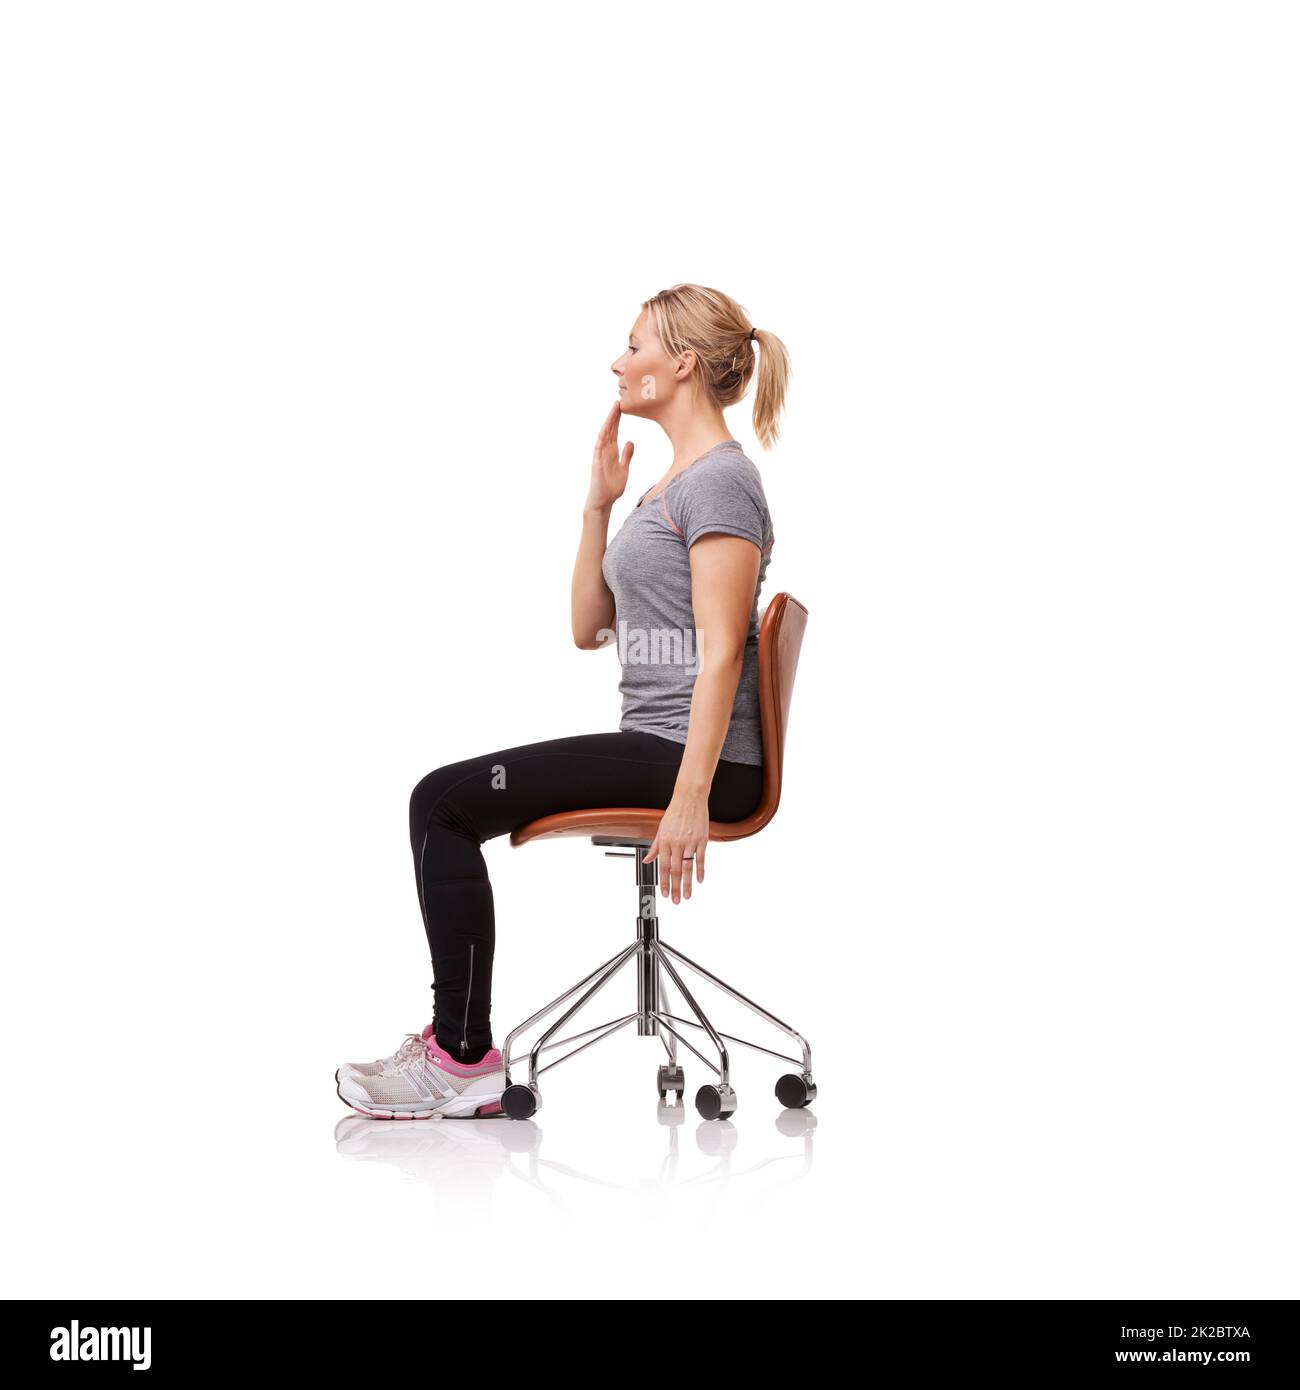 Perfect for your posture. Shot of a sporty woman doing stretches on a chair. Stock Photo